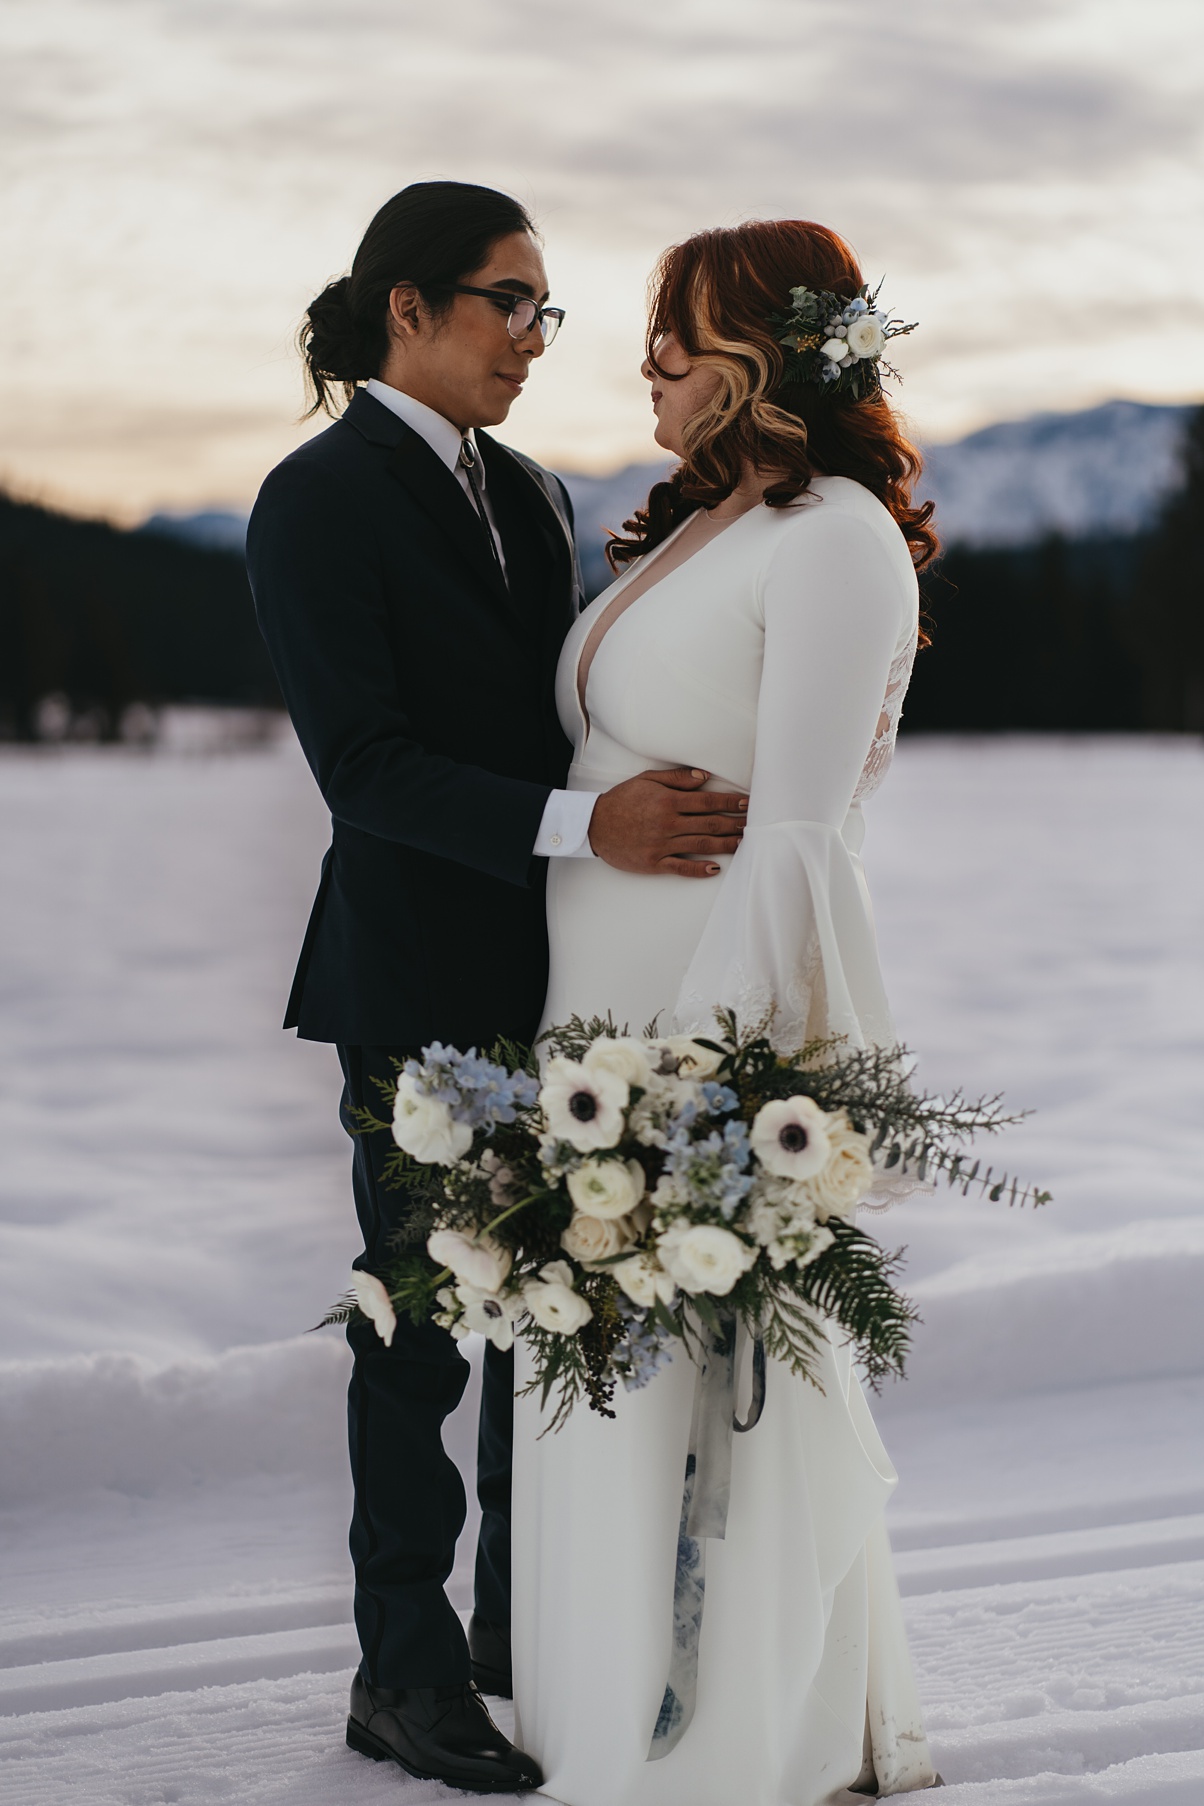 A couple embracing at sunset on their wedding day, in the snow, holding bouquet